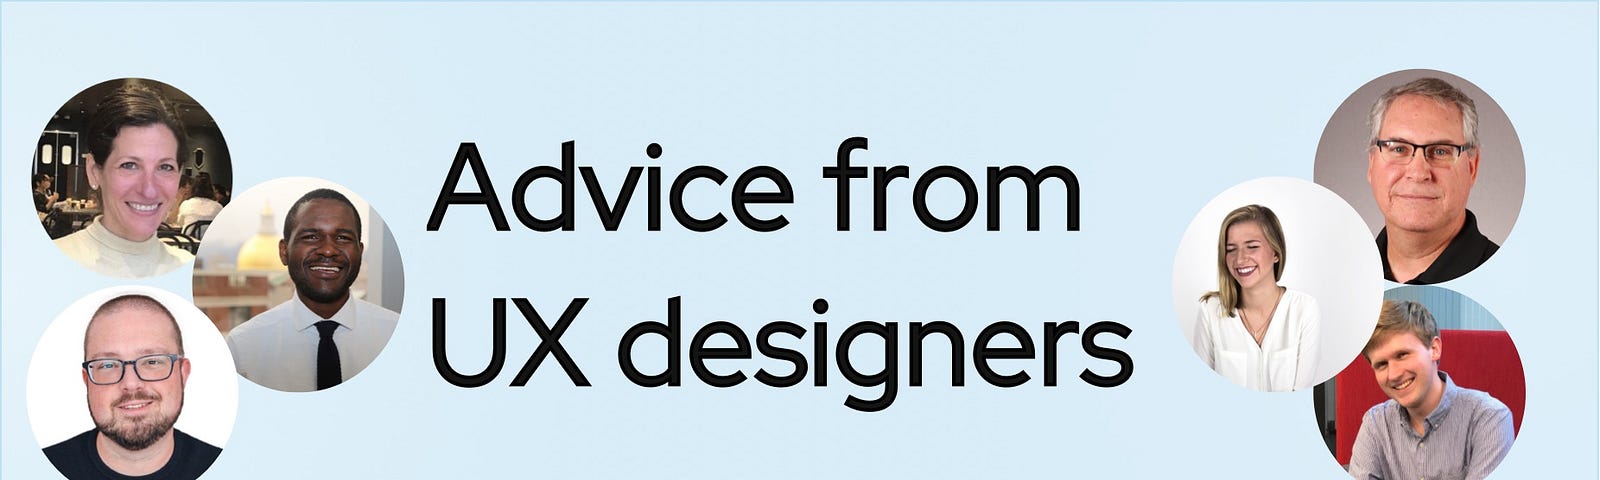 A banner that says “Advice from UX designers” with headshots of 6 designers